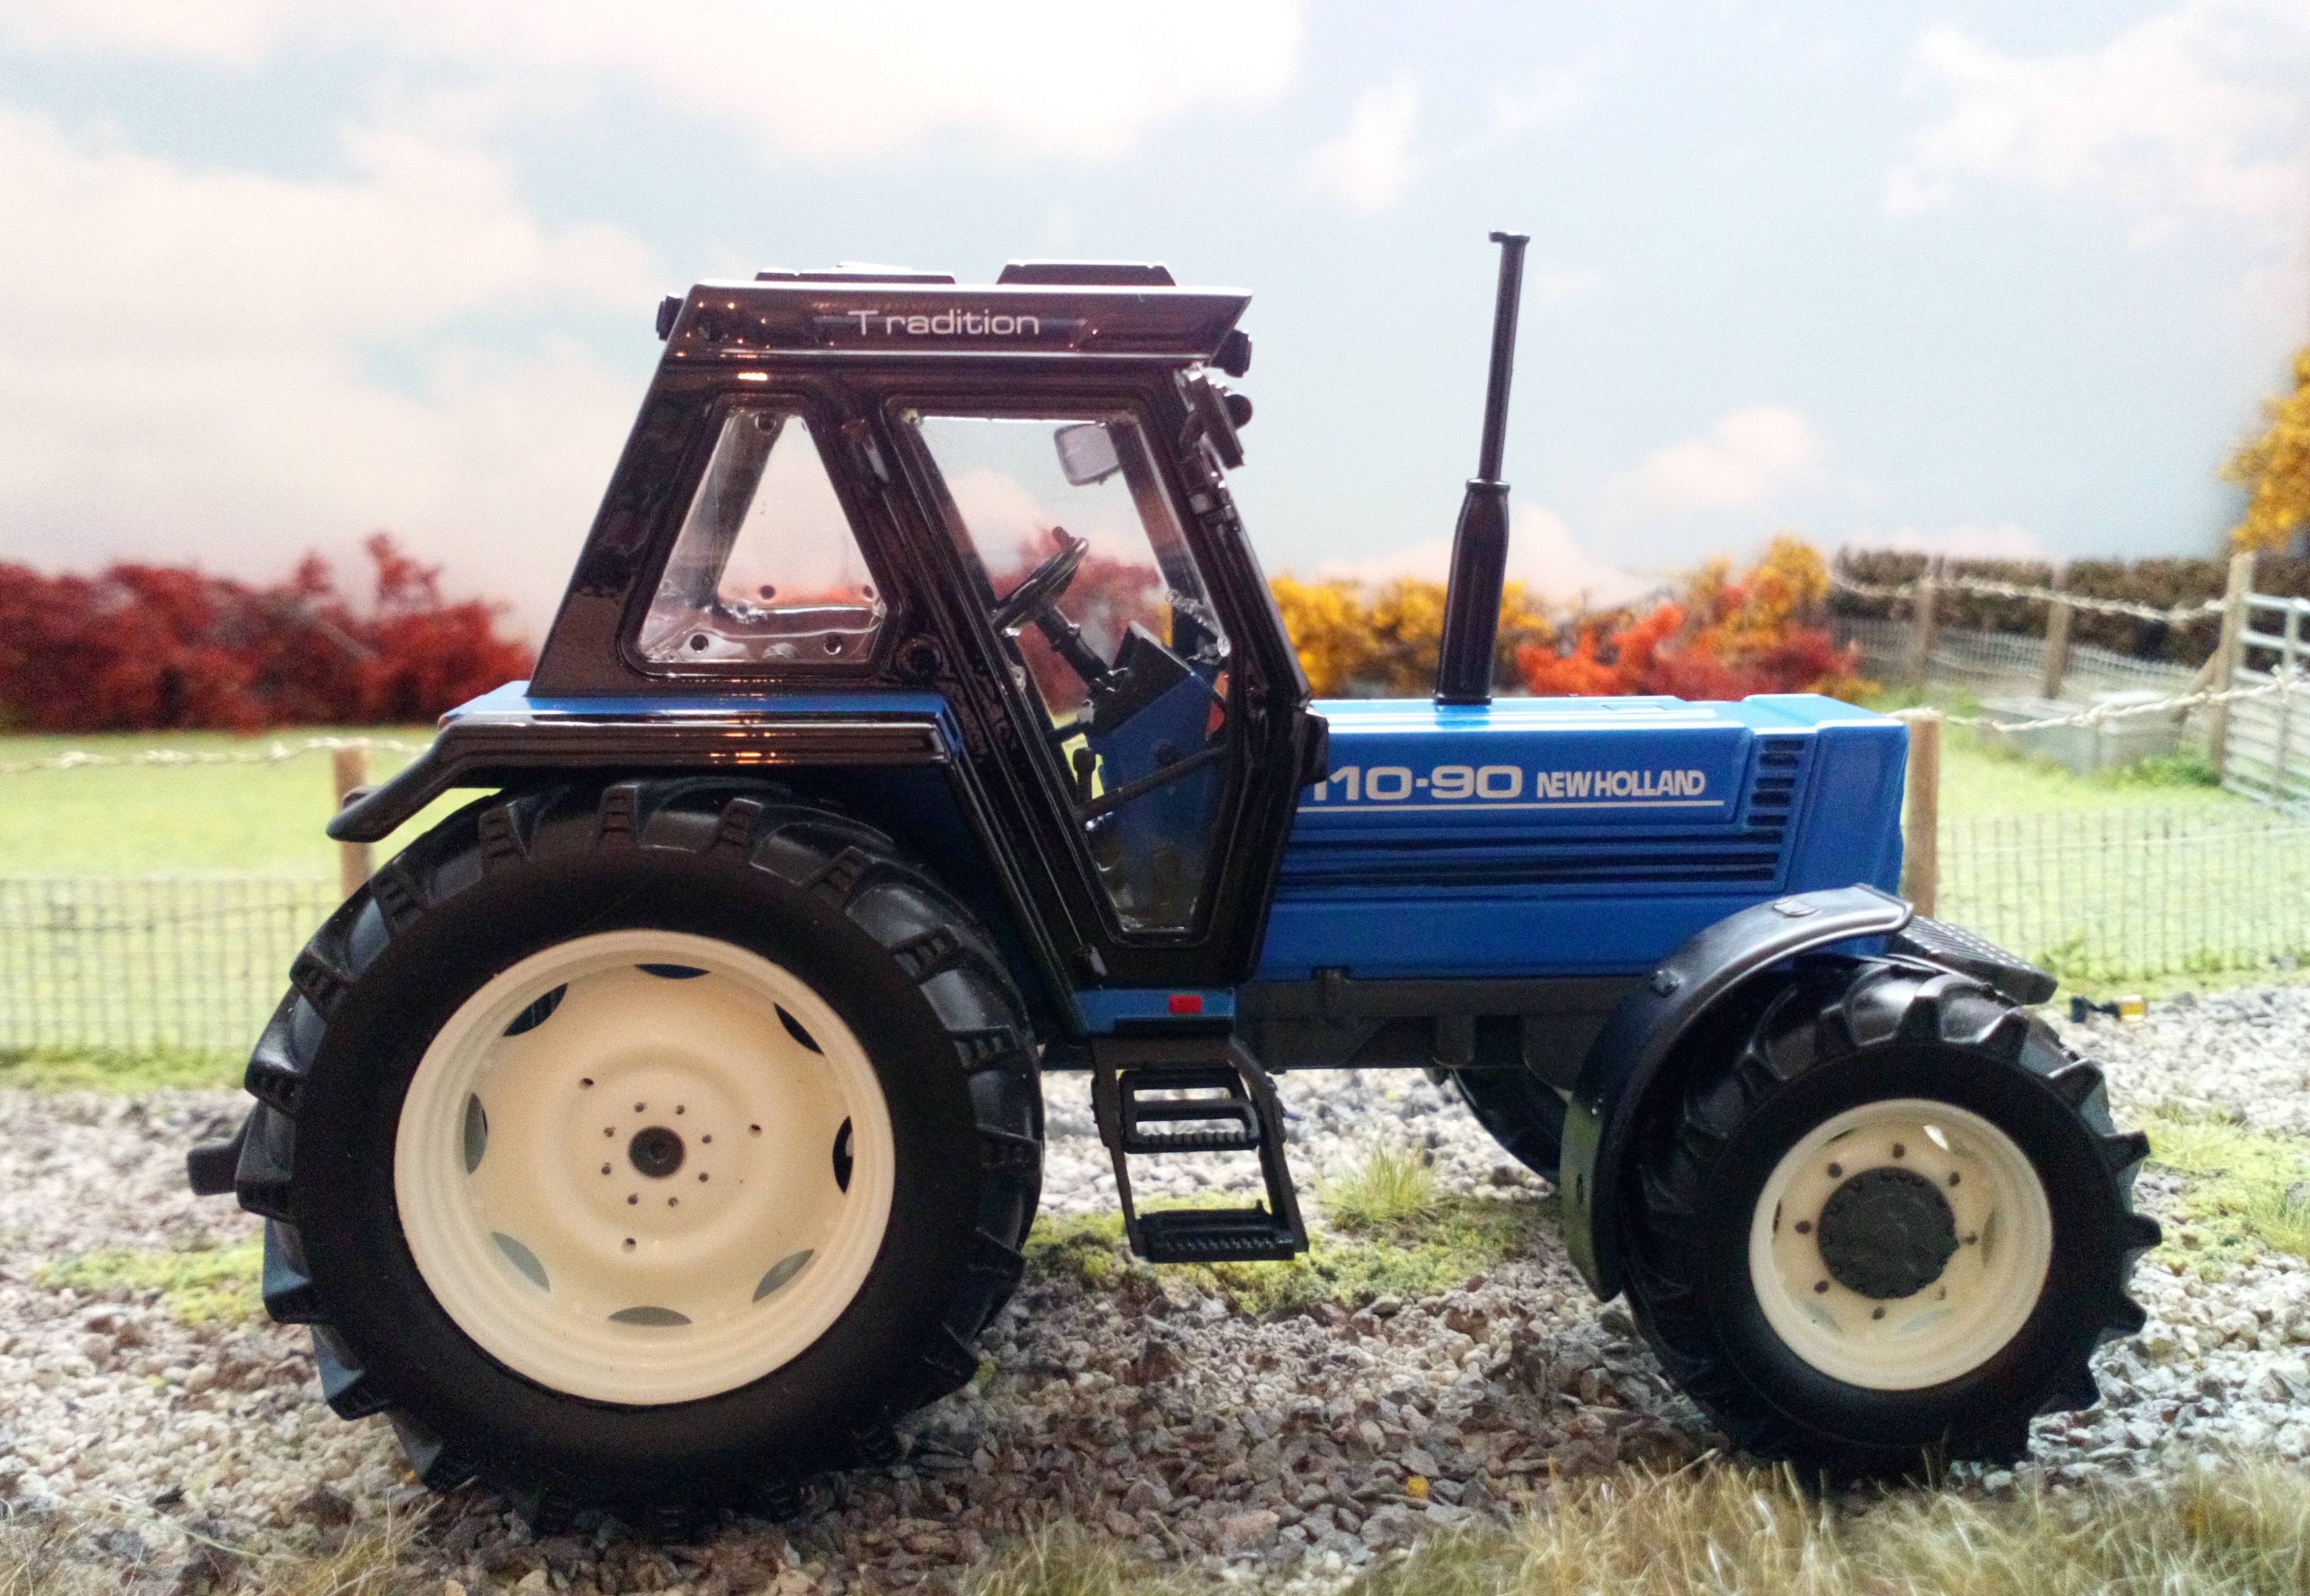 SPECIAL PRICE ROS New Holland 110-90 Tractor 1:32 scale 30115 